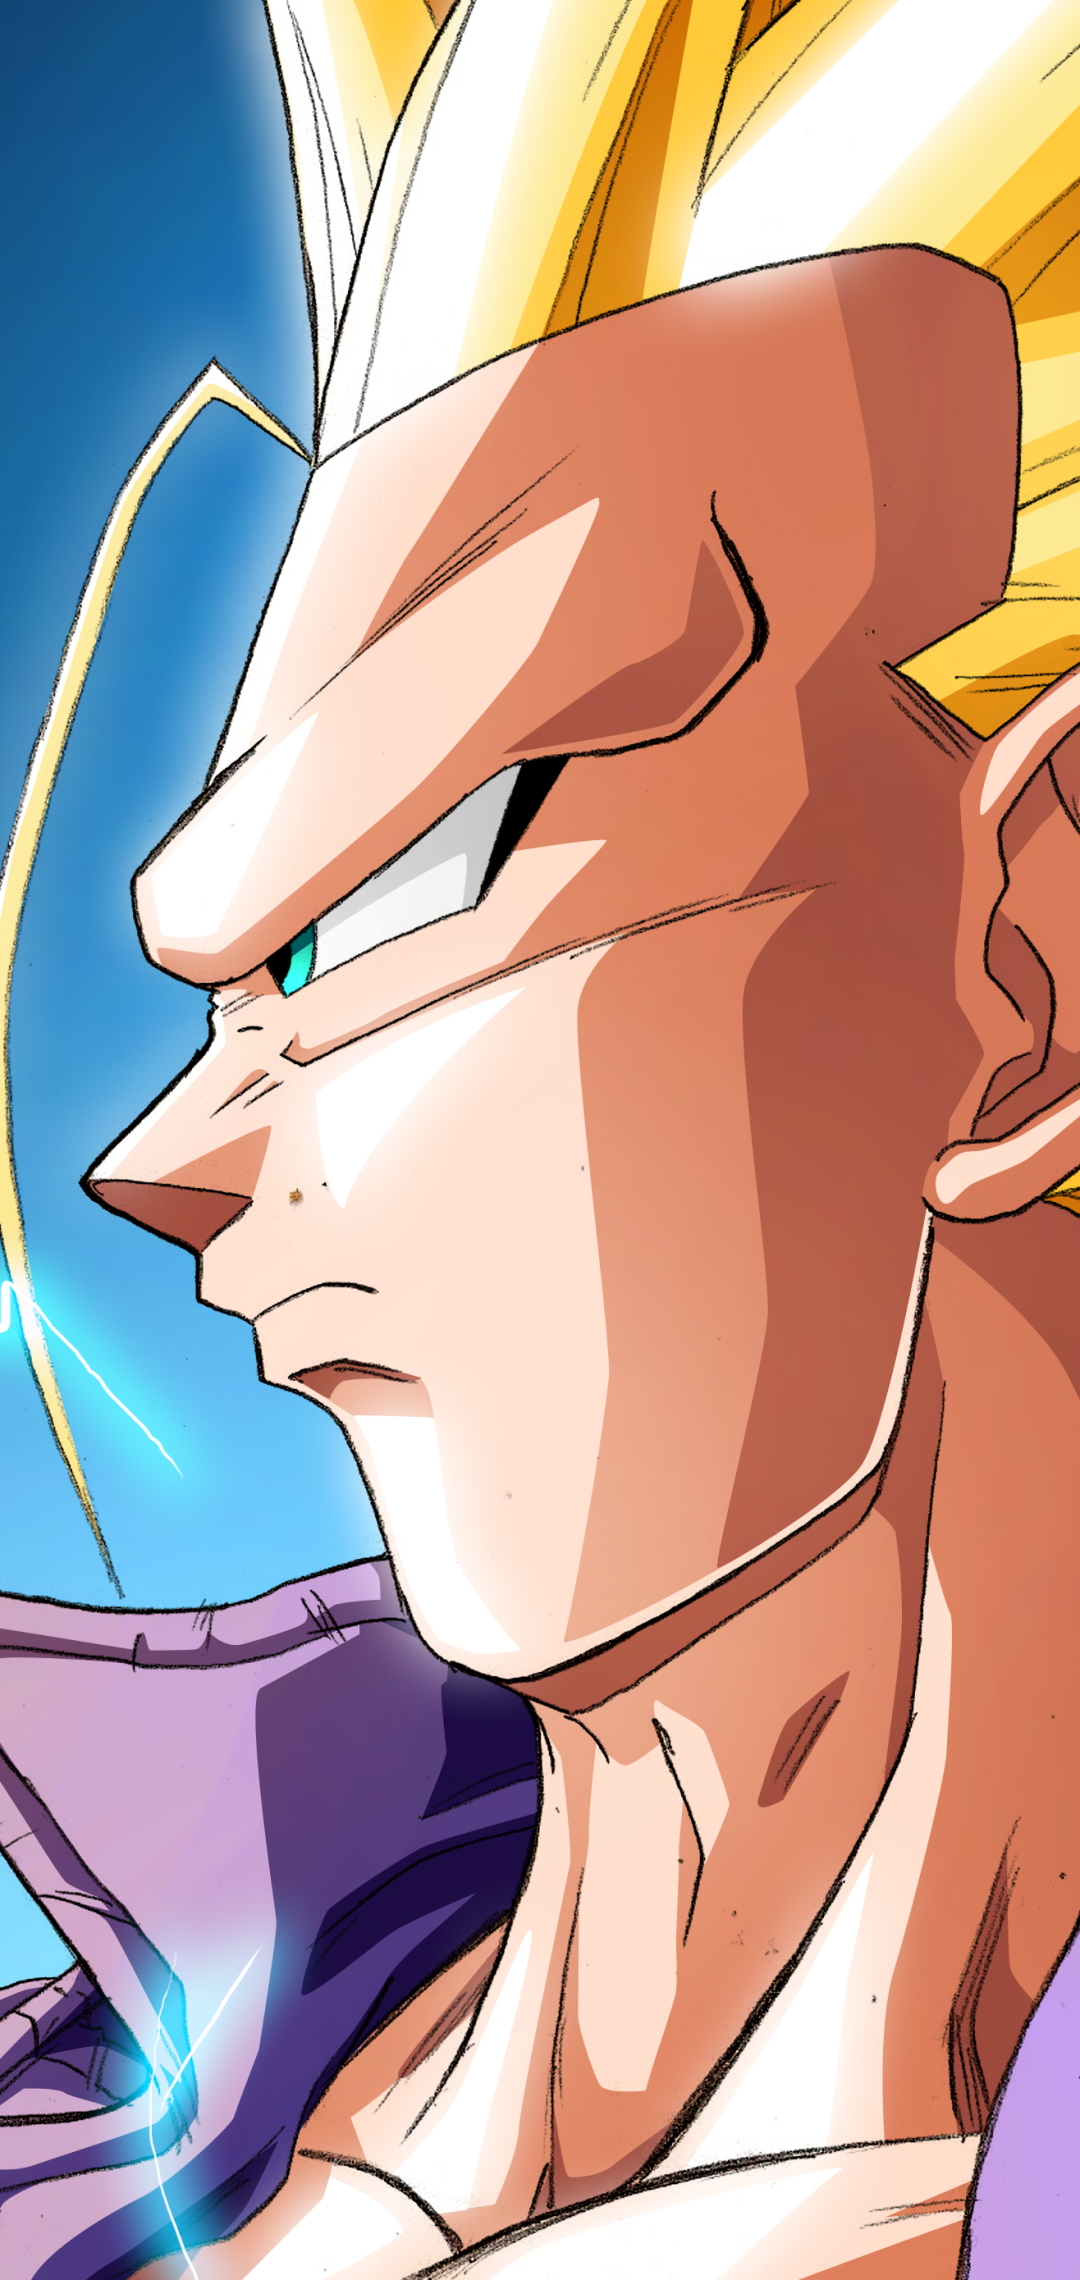 Future Trunks SSJ3 by Tom Skender - Mobile Abyss